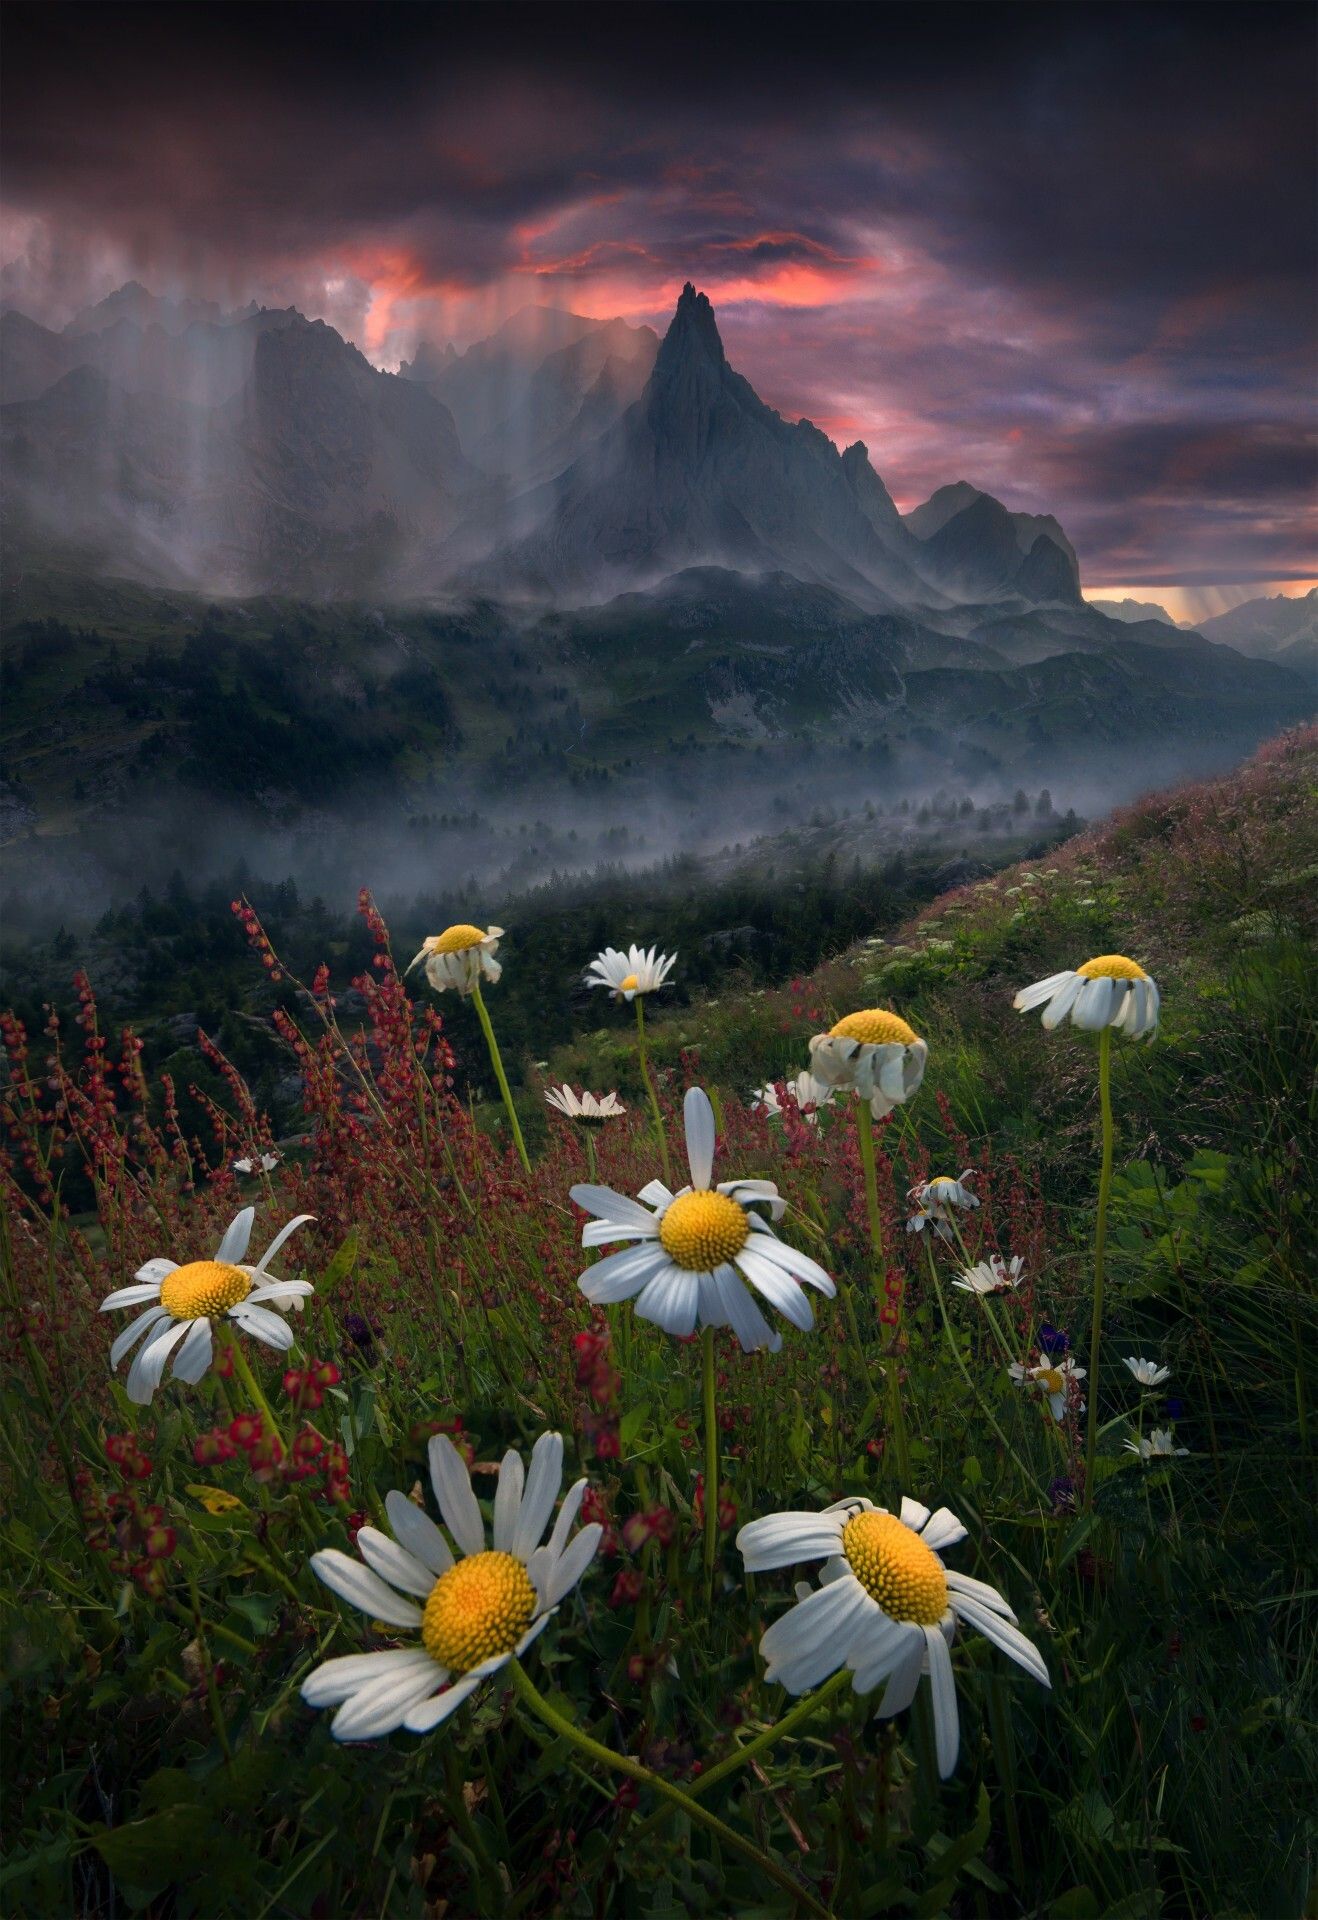 A field of daisies with mountains in the background. - Shrek